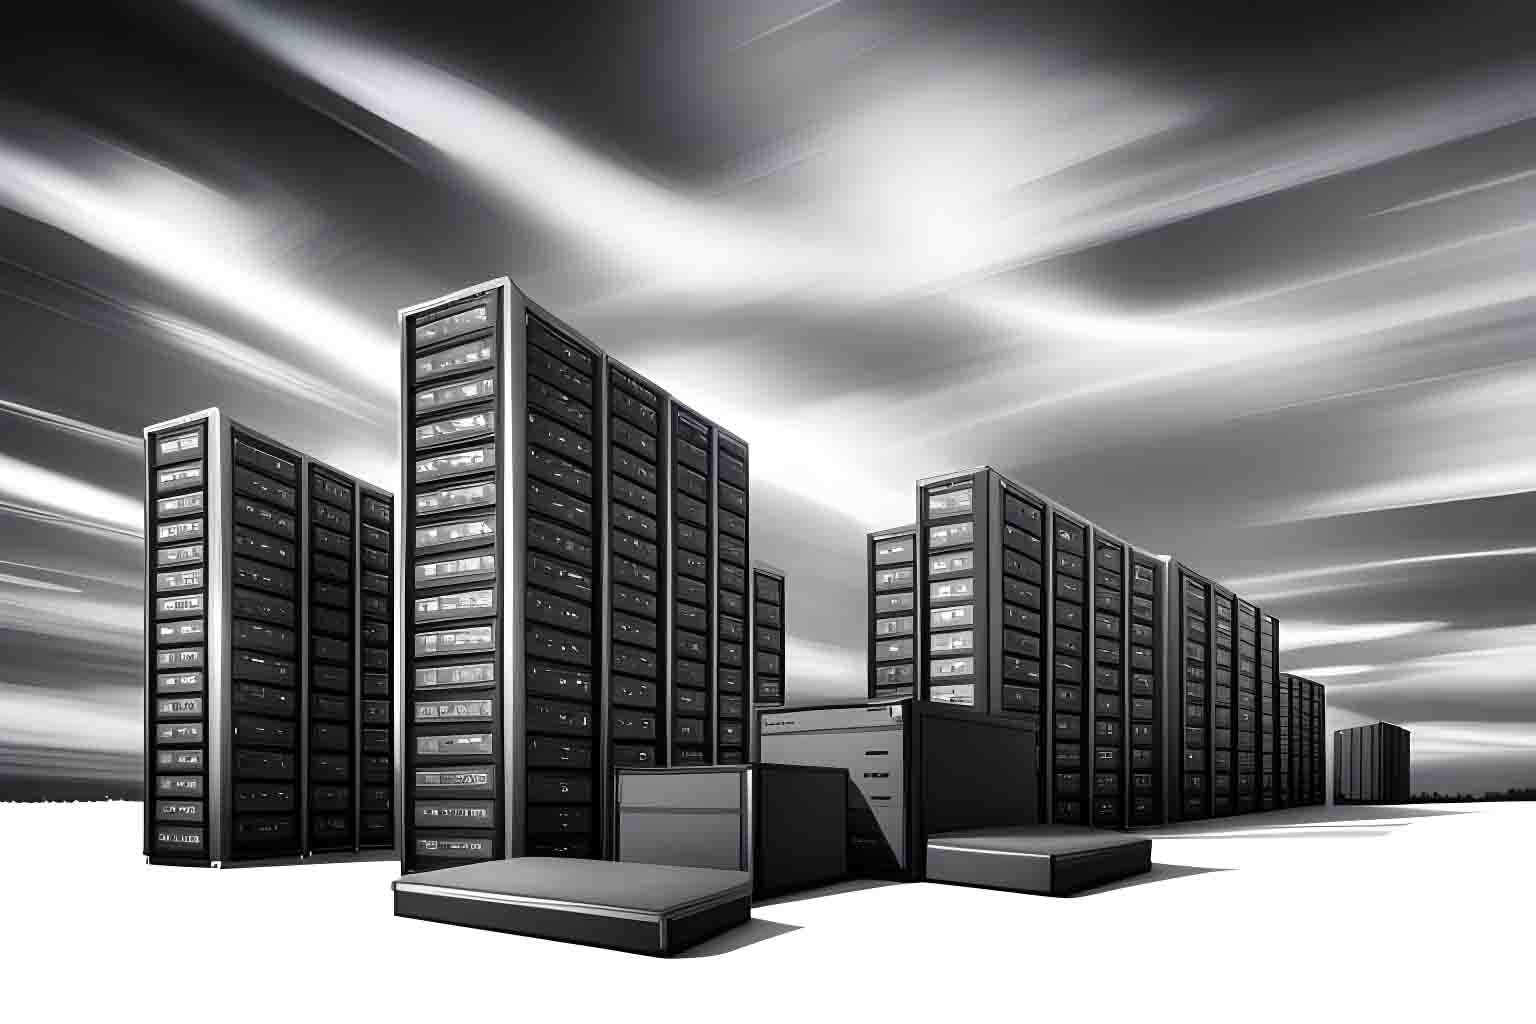 Archive-reporting--seamlessly-combine-archive-and-production-data--eliminating-unnecessary-Cloud-storage-costs-while-providing-comprehensive-reporting-across-systems-JL1